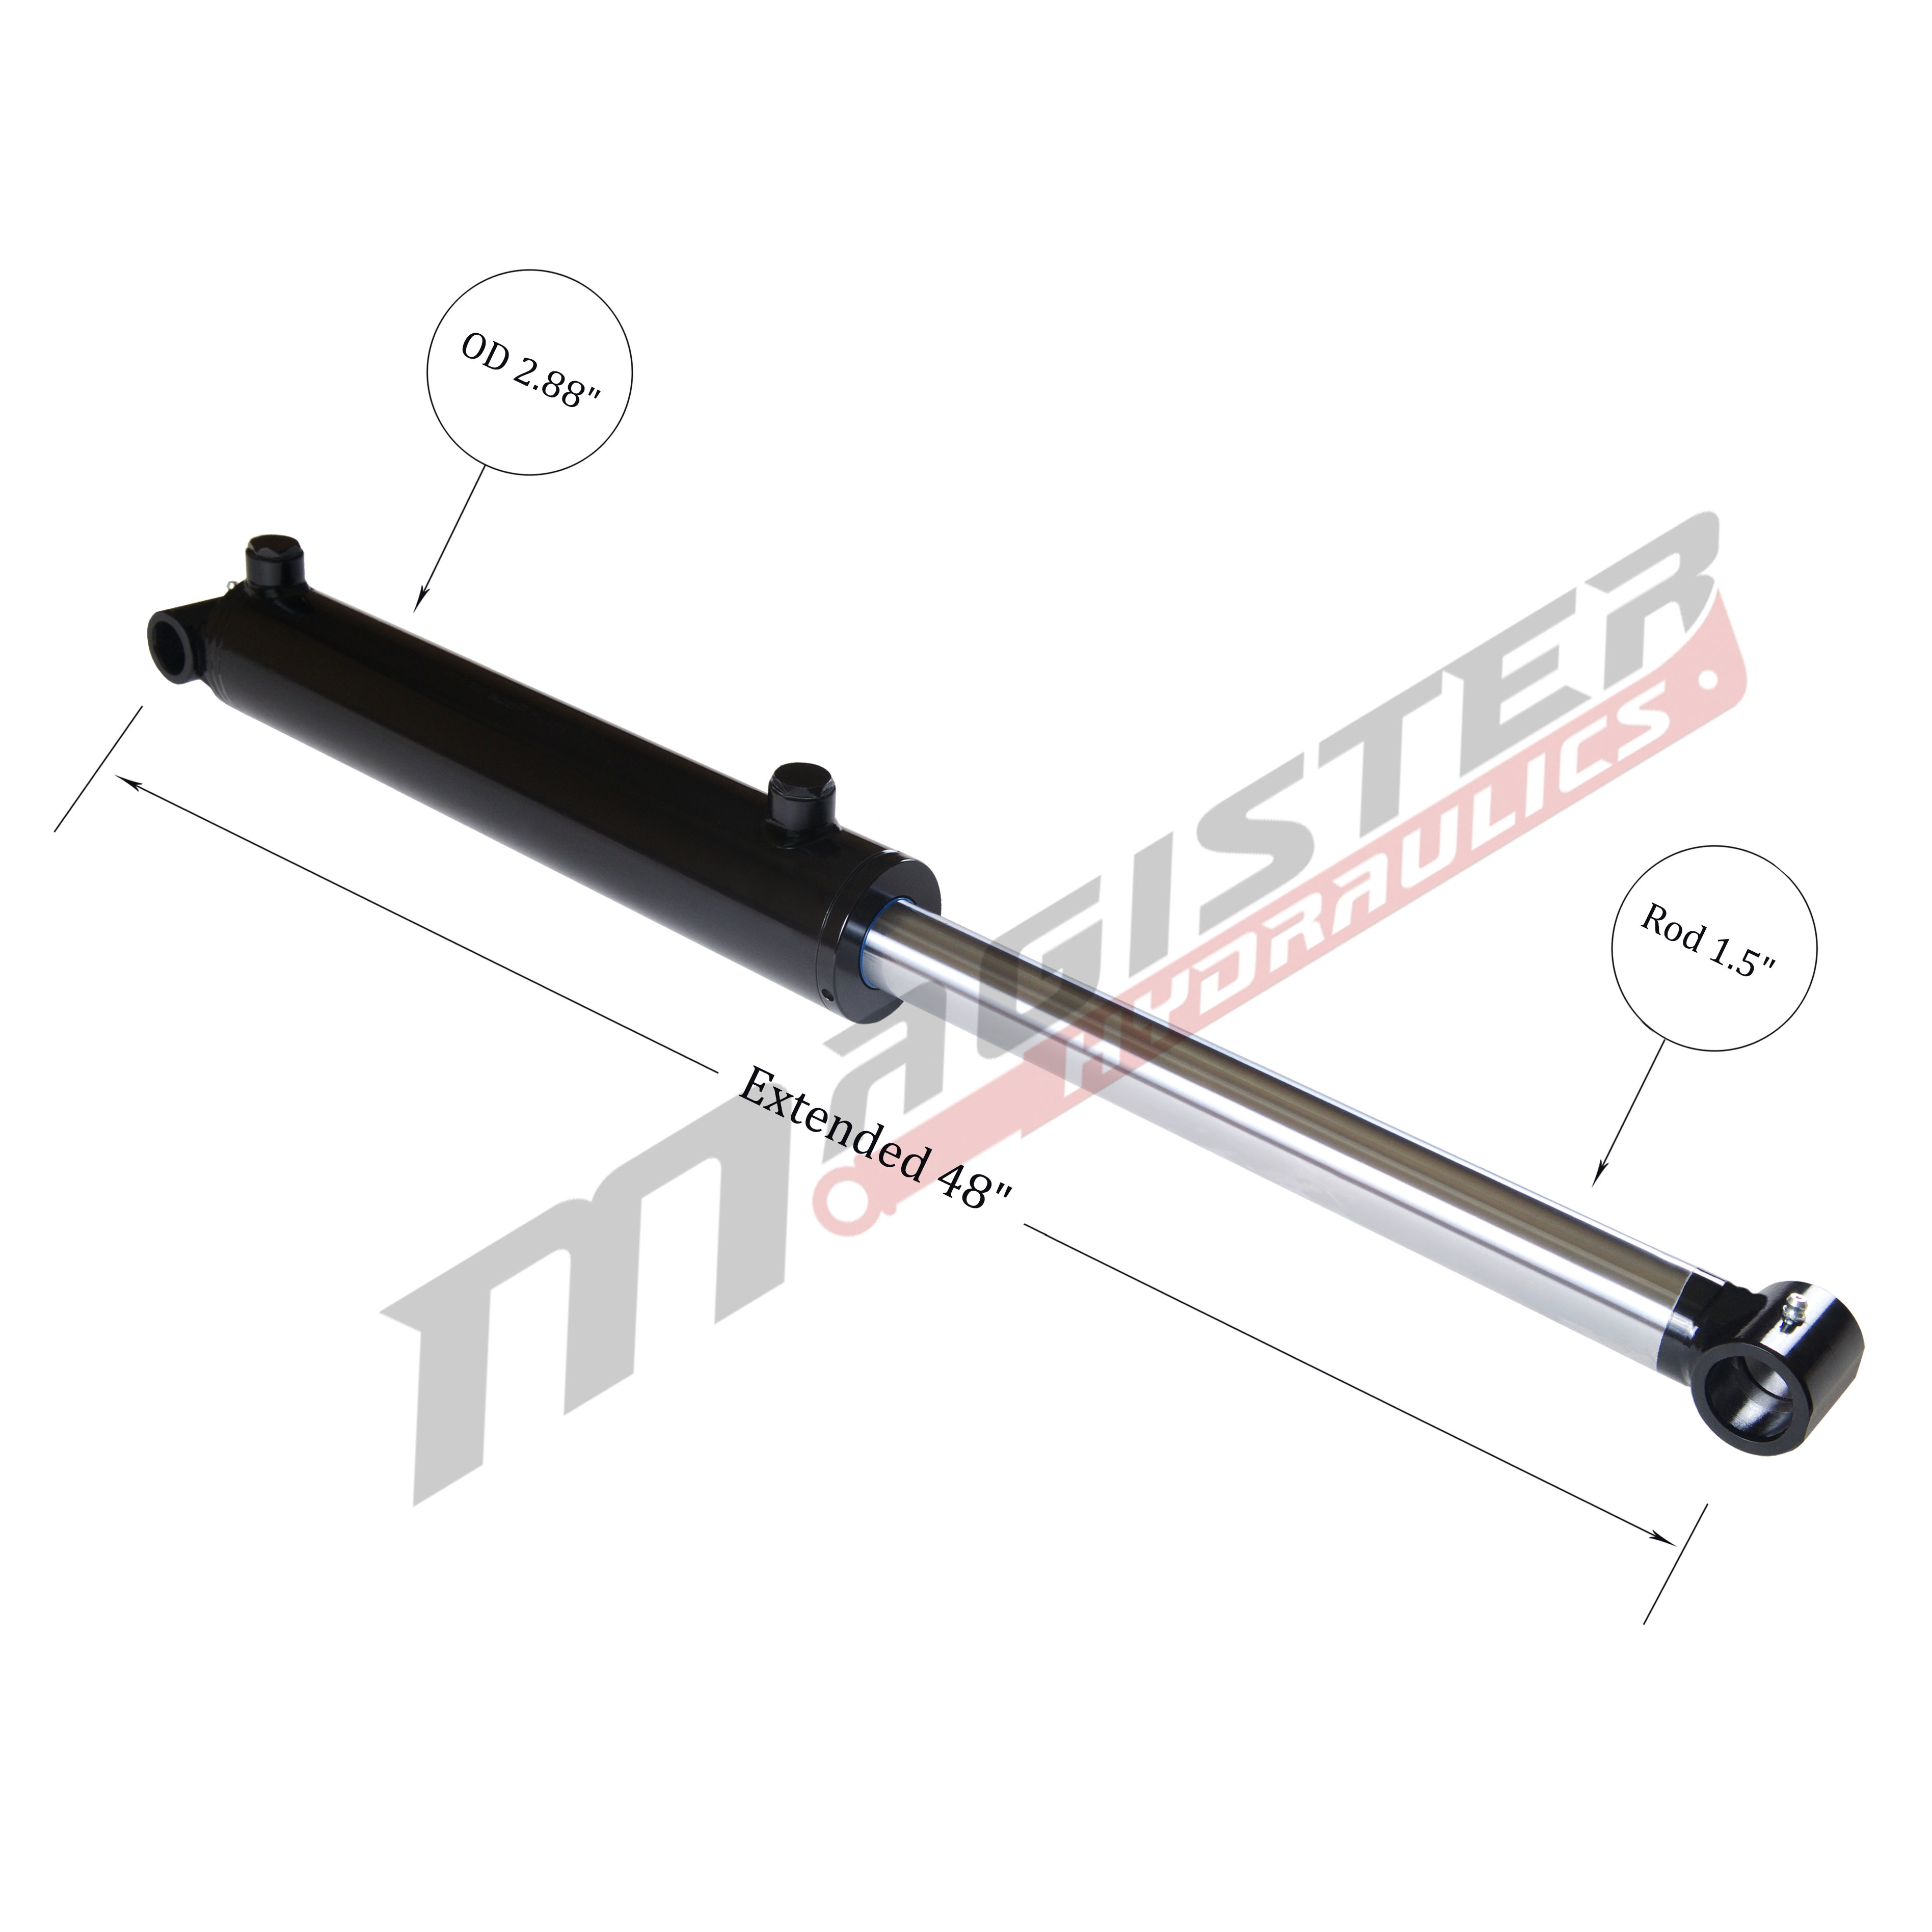 2.5 bore x 20 stroke hydraulic cylinder, welded cross tube double acting cylinder | Magister Hydraulics